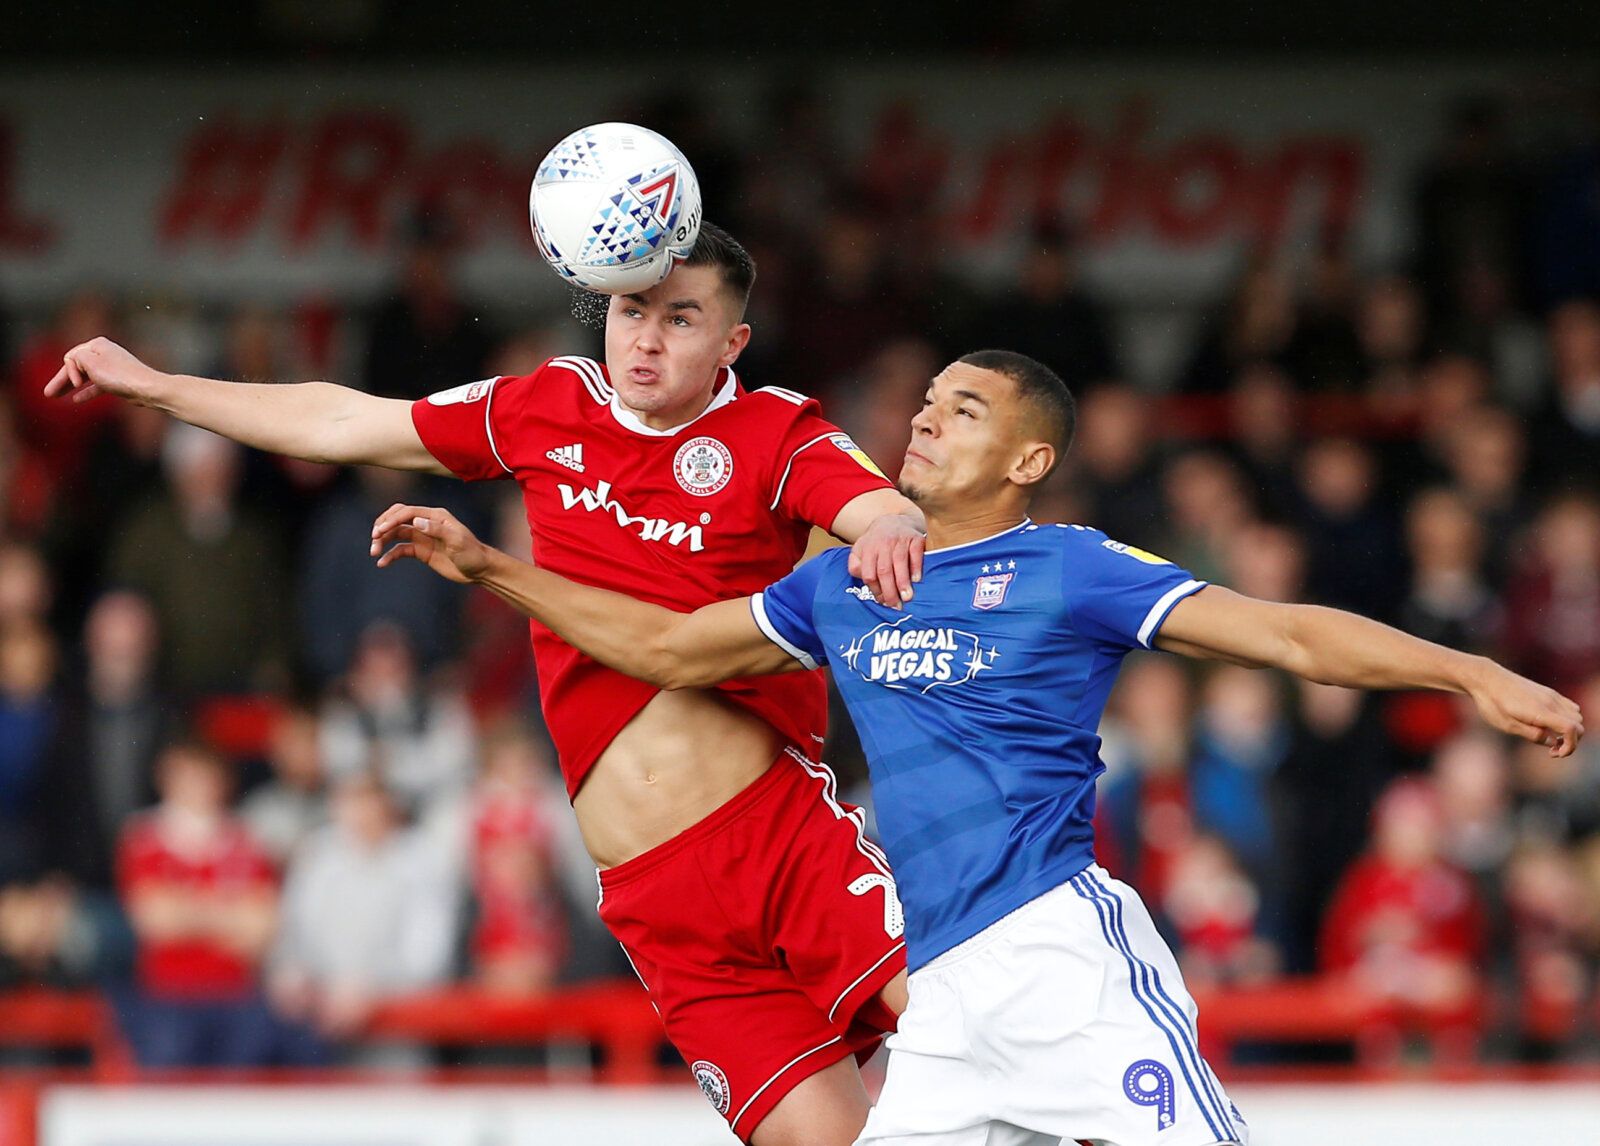 Soccer Football - League One - Accrington Stanley v Ipswich Town - Wham Stadium, Accrington, Britain - October 20, 2019   Accrington Stanley's Callum Johnson in action with Ipswich Town's Kayden Jackson   Action Images/Craig Brough    EDITORIAL USE ONLY. No use with unauthorized audio, video, data, fixture lists, club/league logos or 